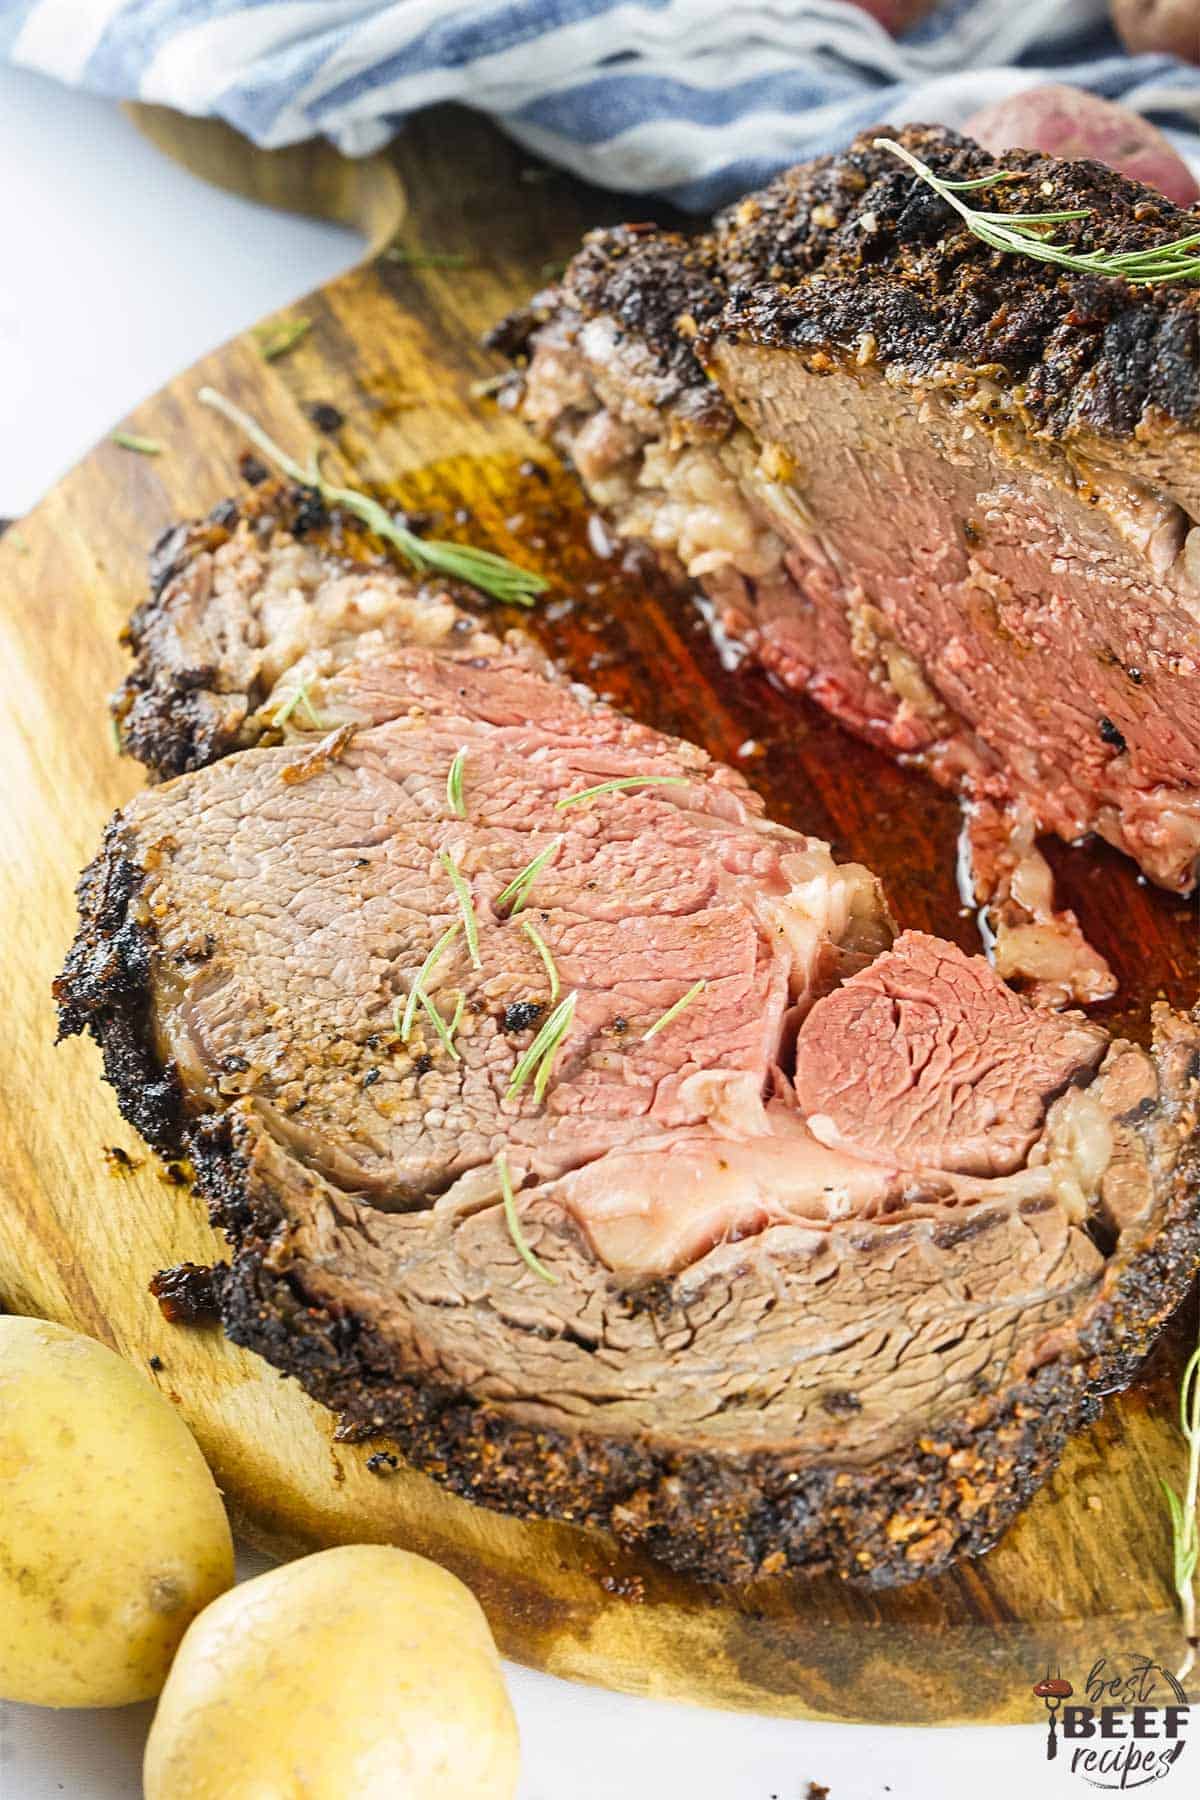 Sliced prime rib on a cutting board with potatoes and herbs